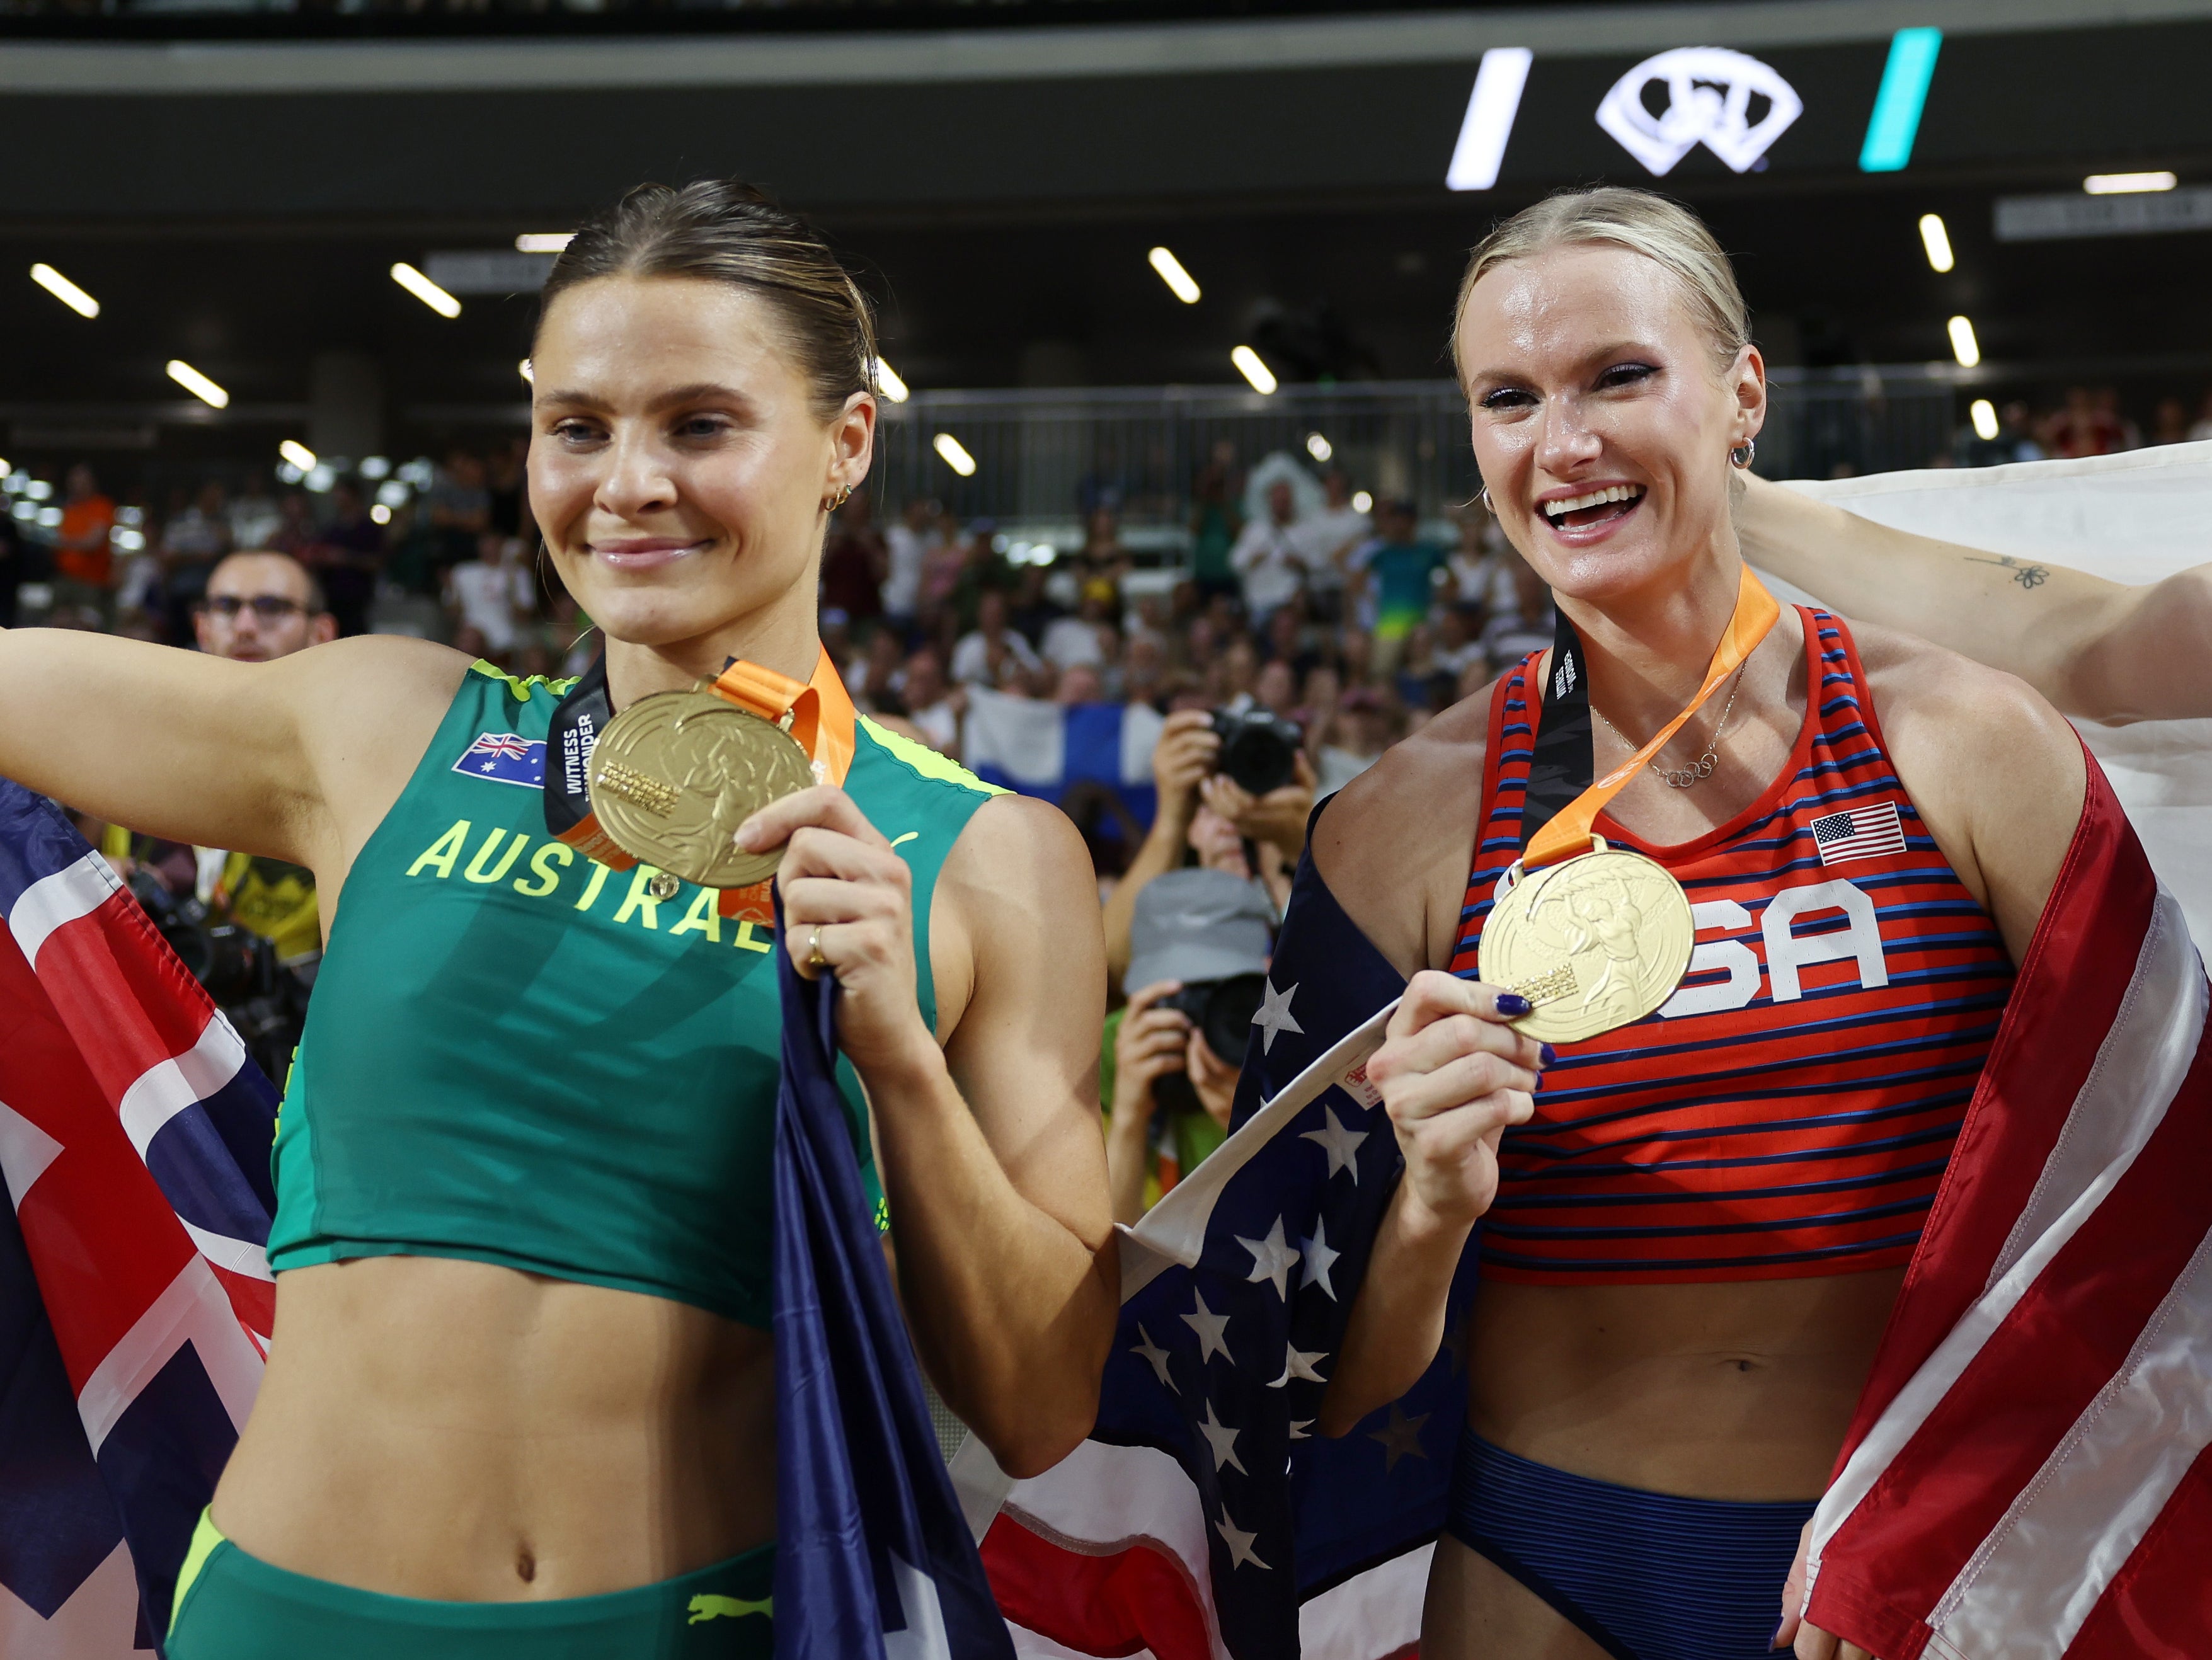 Pole vault pair agree to share gold medal at World Championships